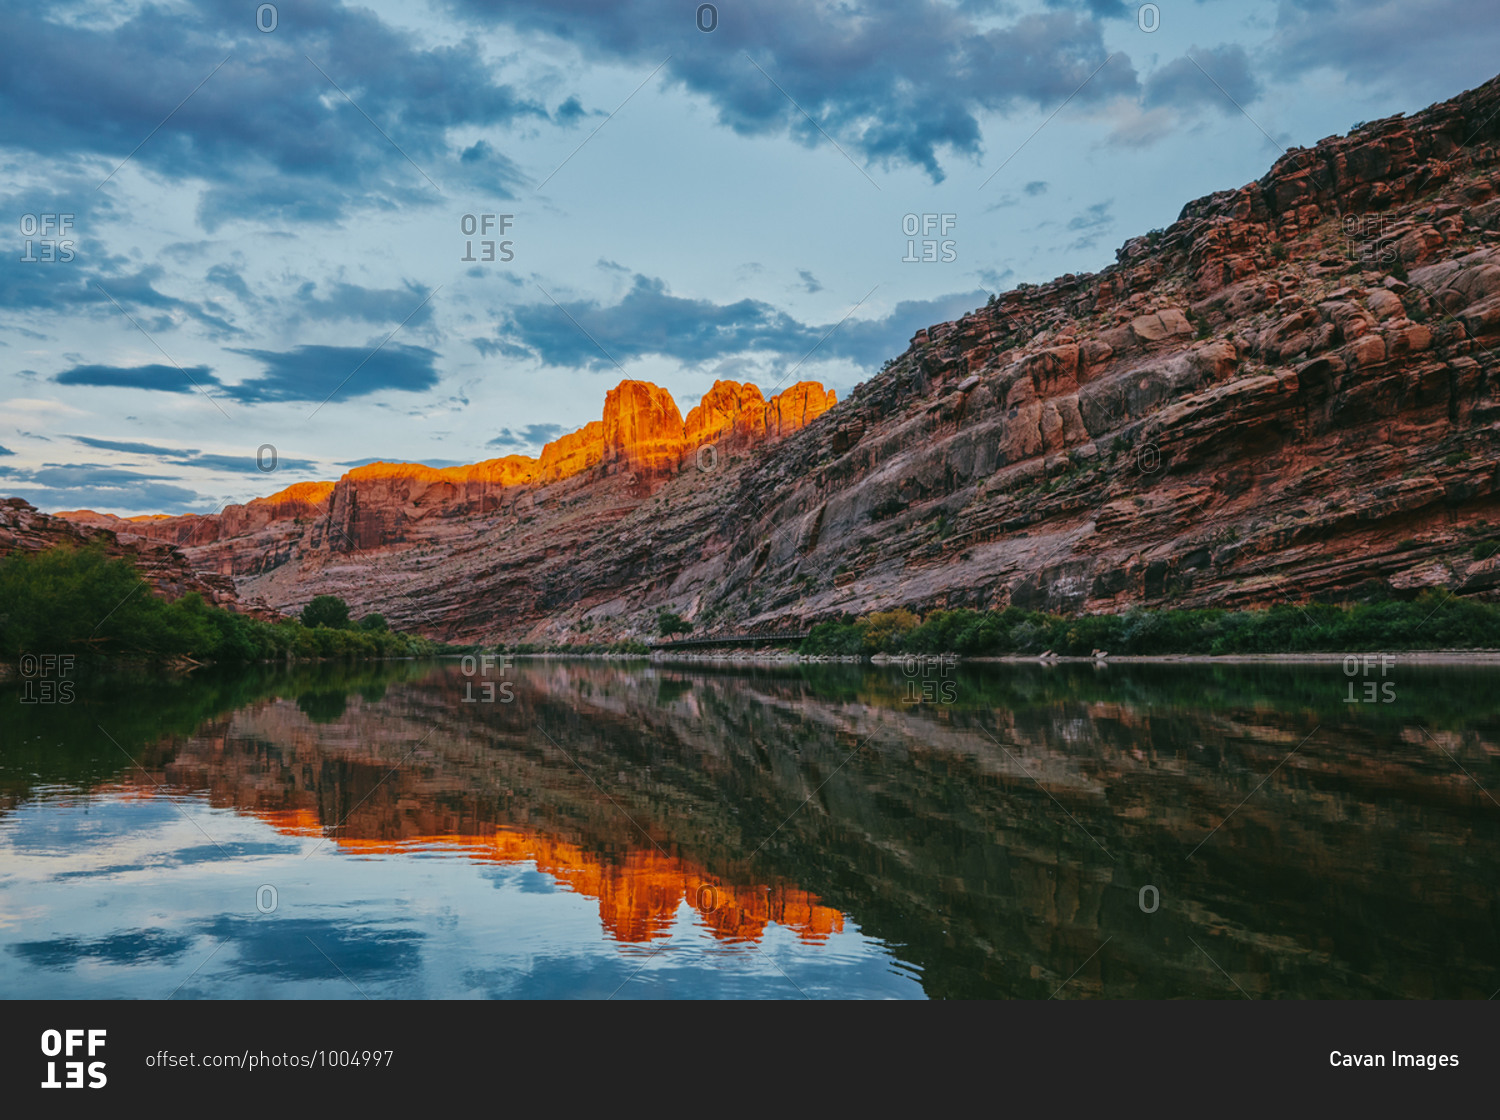 Sunset over mountain by Colorado River in Moab, Utah.